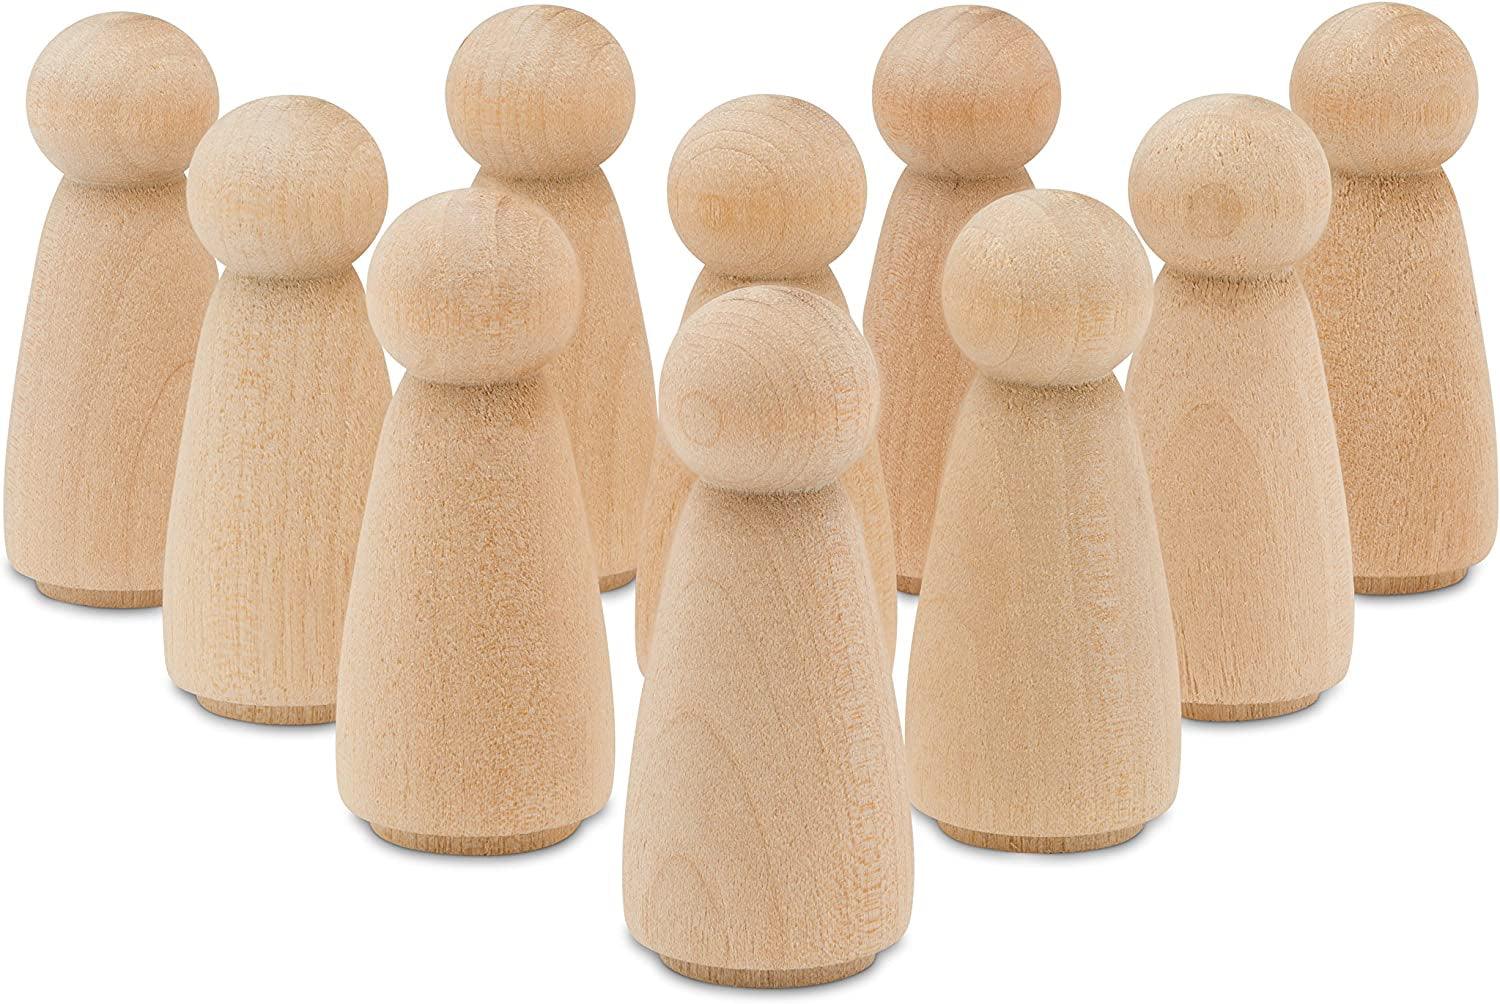 50 Pieces Unfinished Wood Peg Dolls with Nesting Cases, Wooden People  Figures for Painting (5 Sizes)